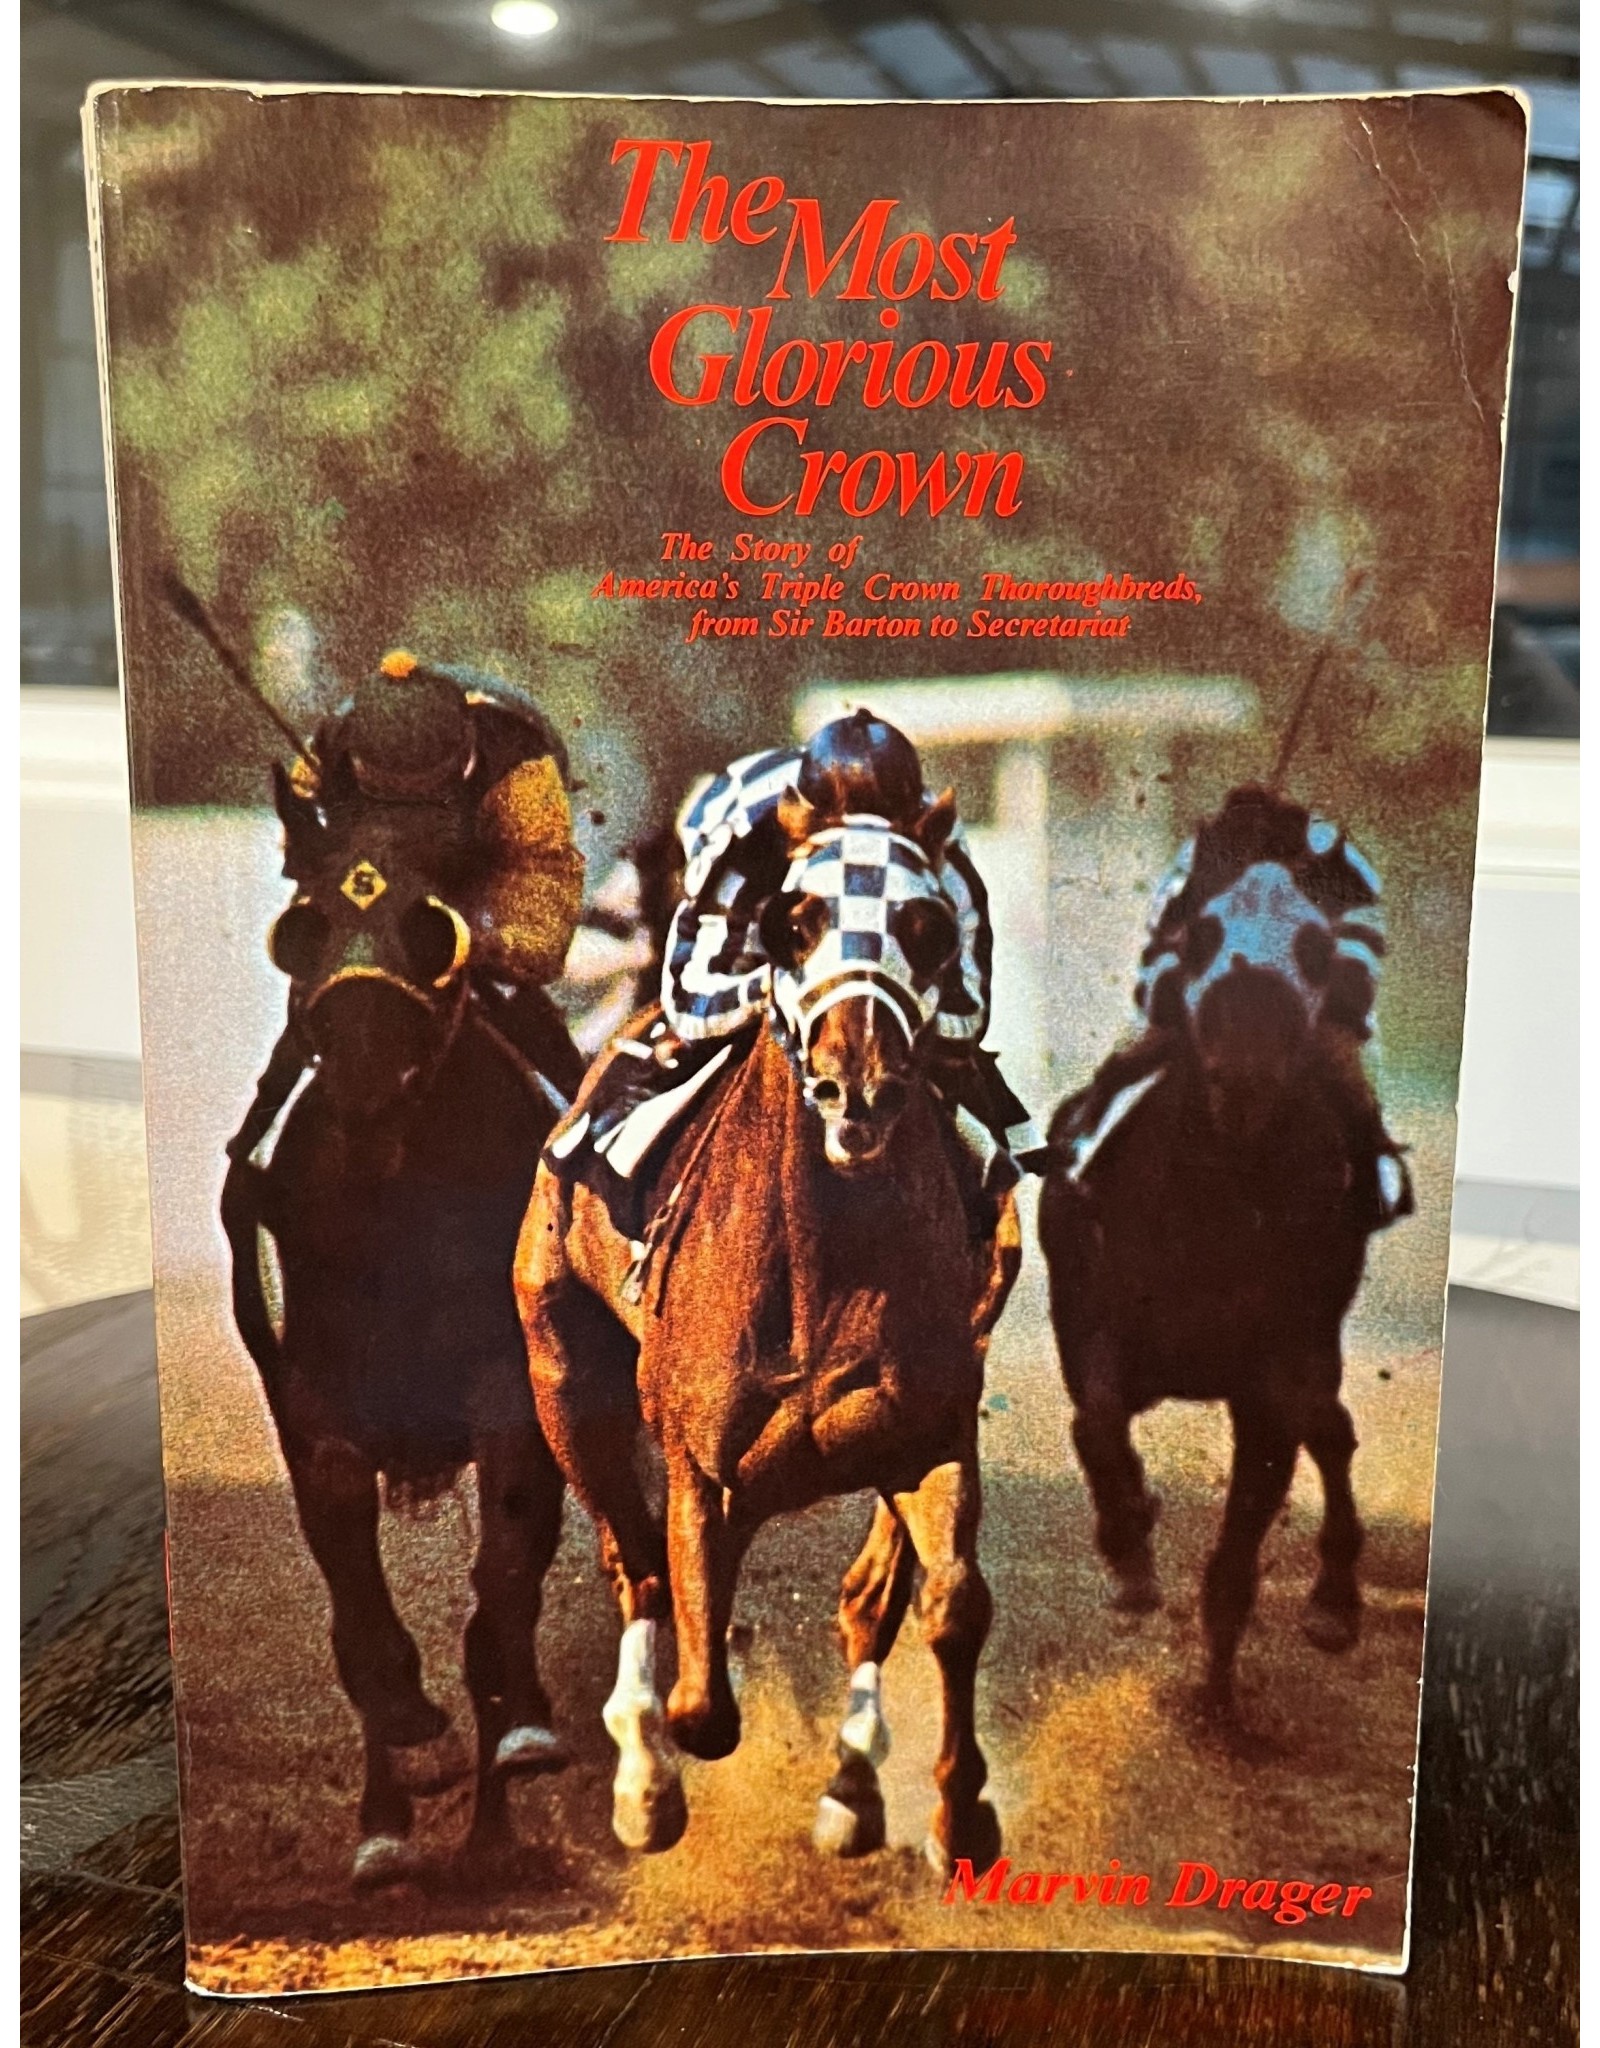 The Most Glorious Crown: The Story of America's Triple Crown Thoroughbreds, from Sir Barton to Secretariat